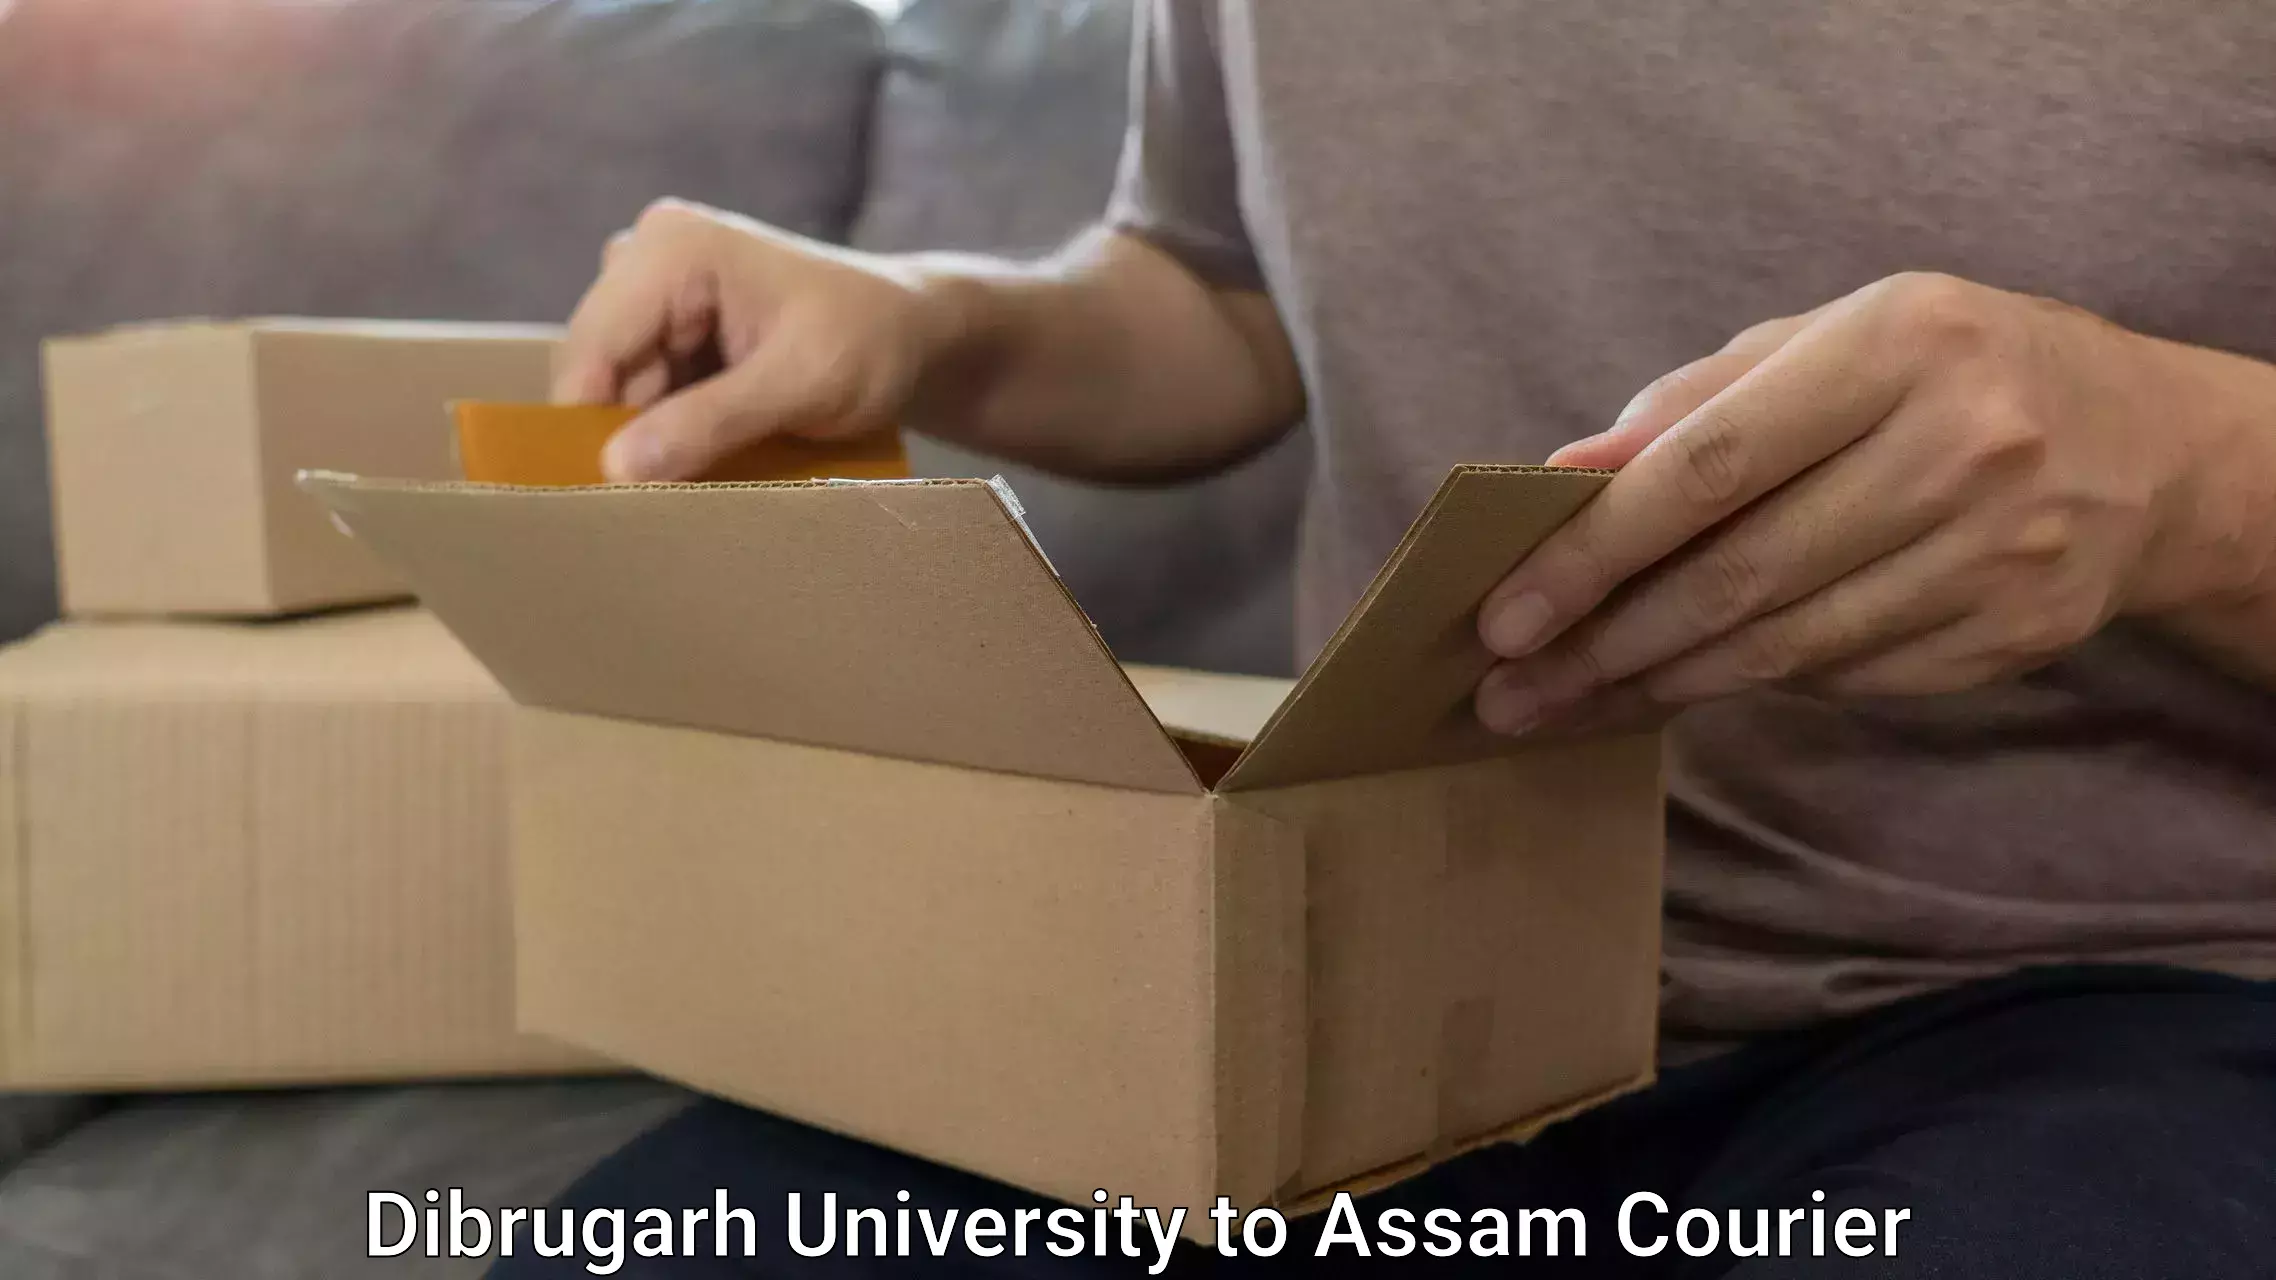 Luggage storage and delivery Dibrugarh University to Tezpur University